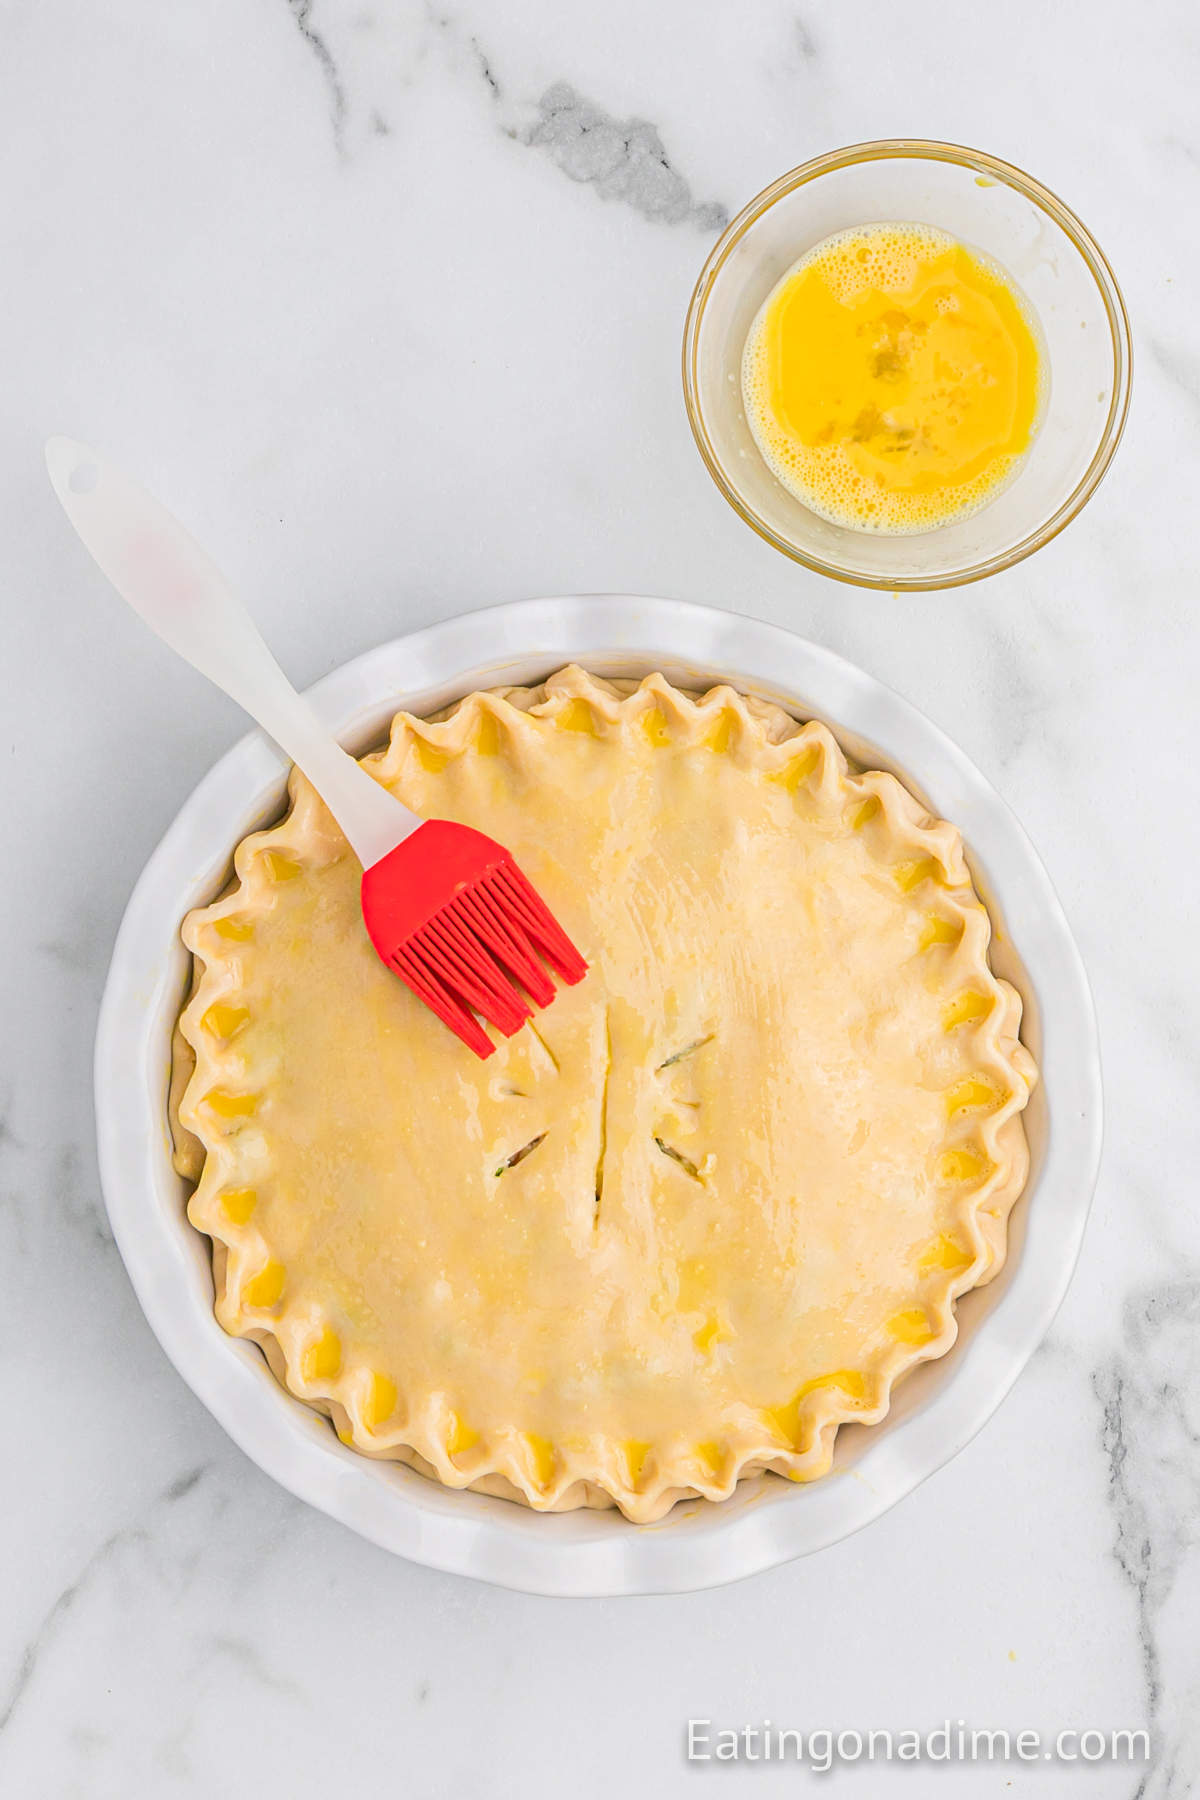 Brush the egg wash over the top pie crust